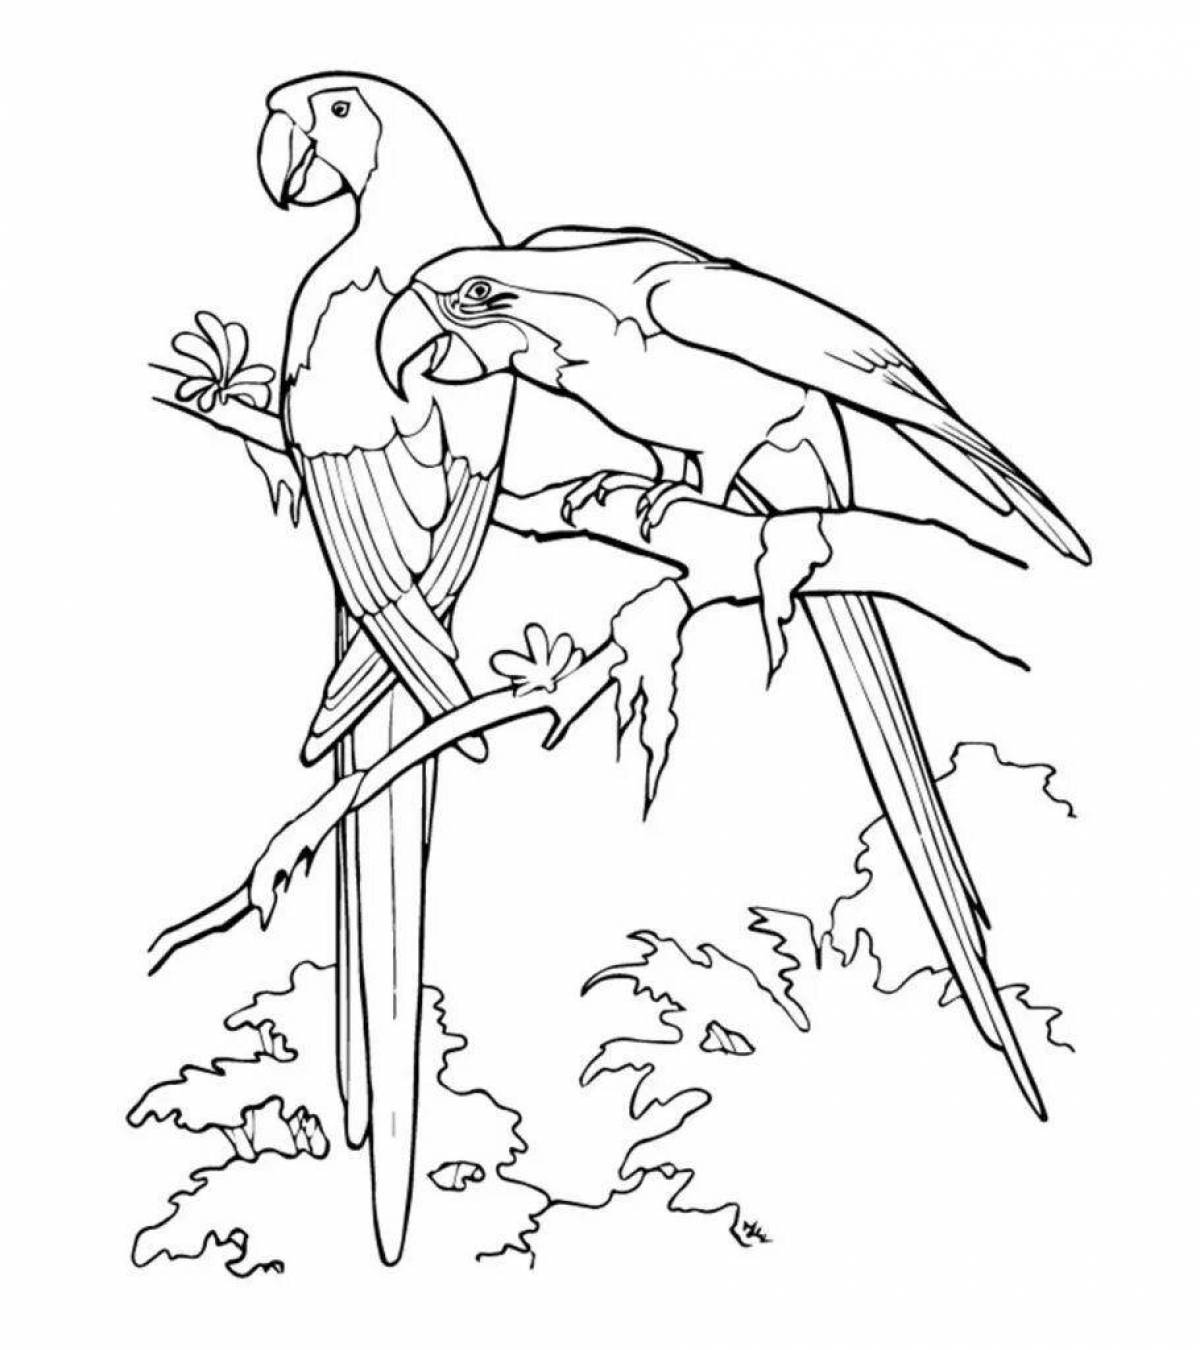 Fun drawing of a parrot for children